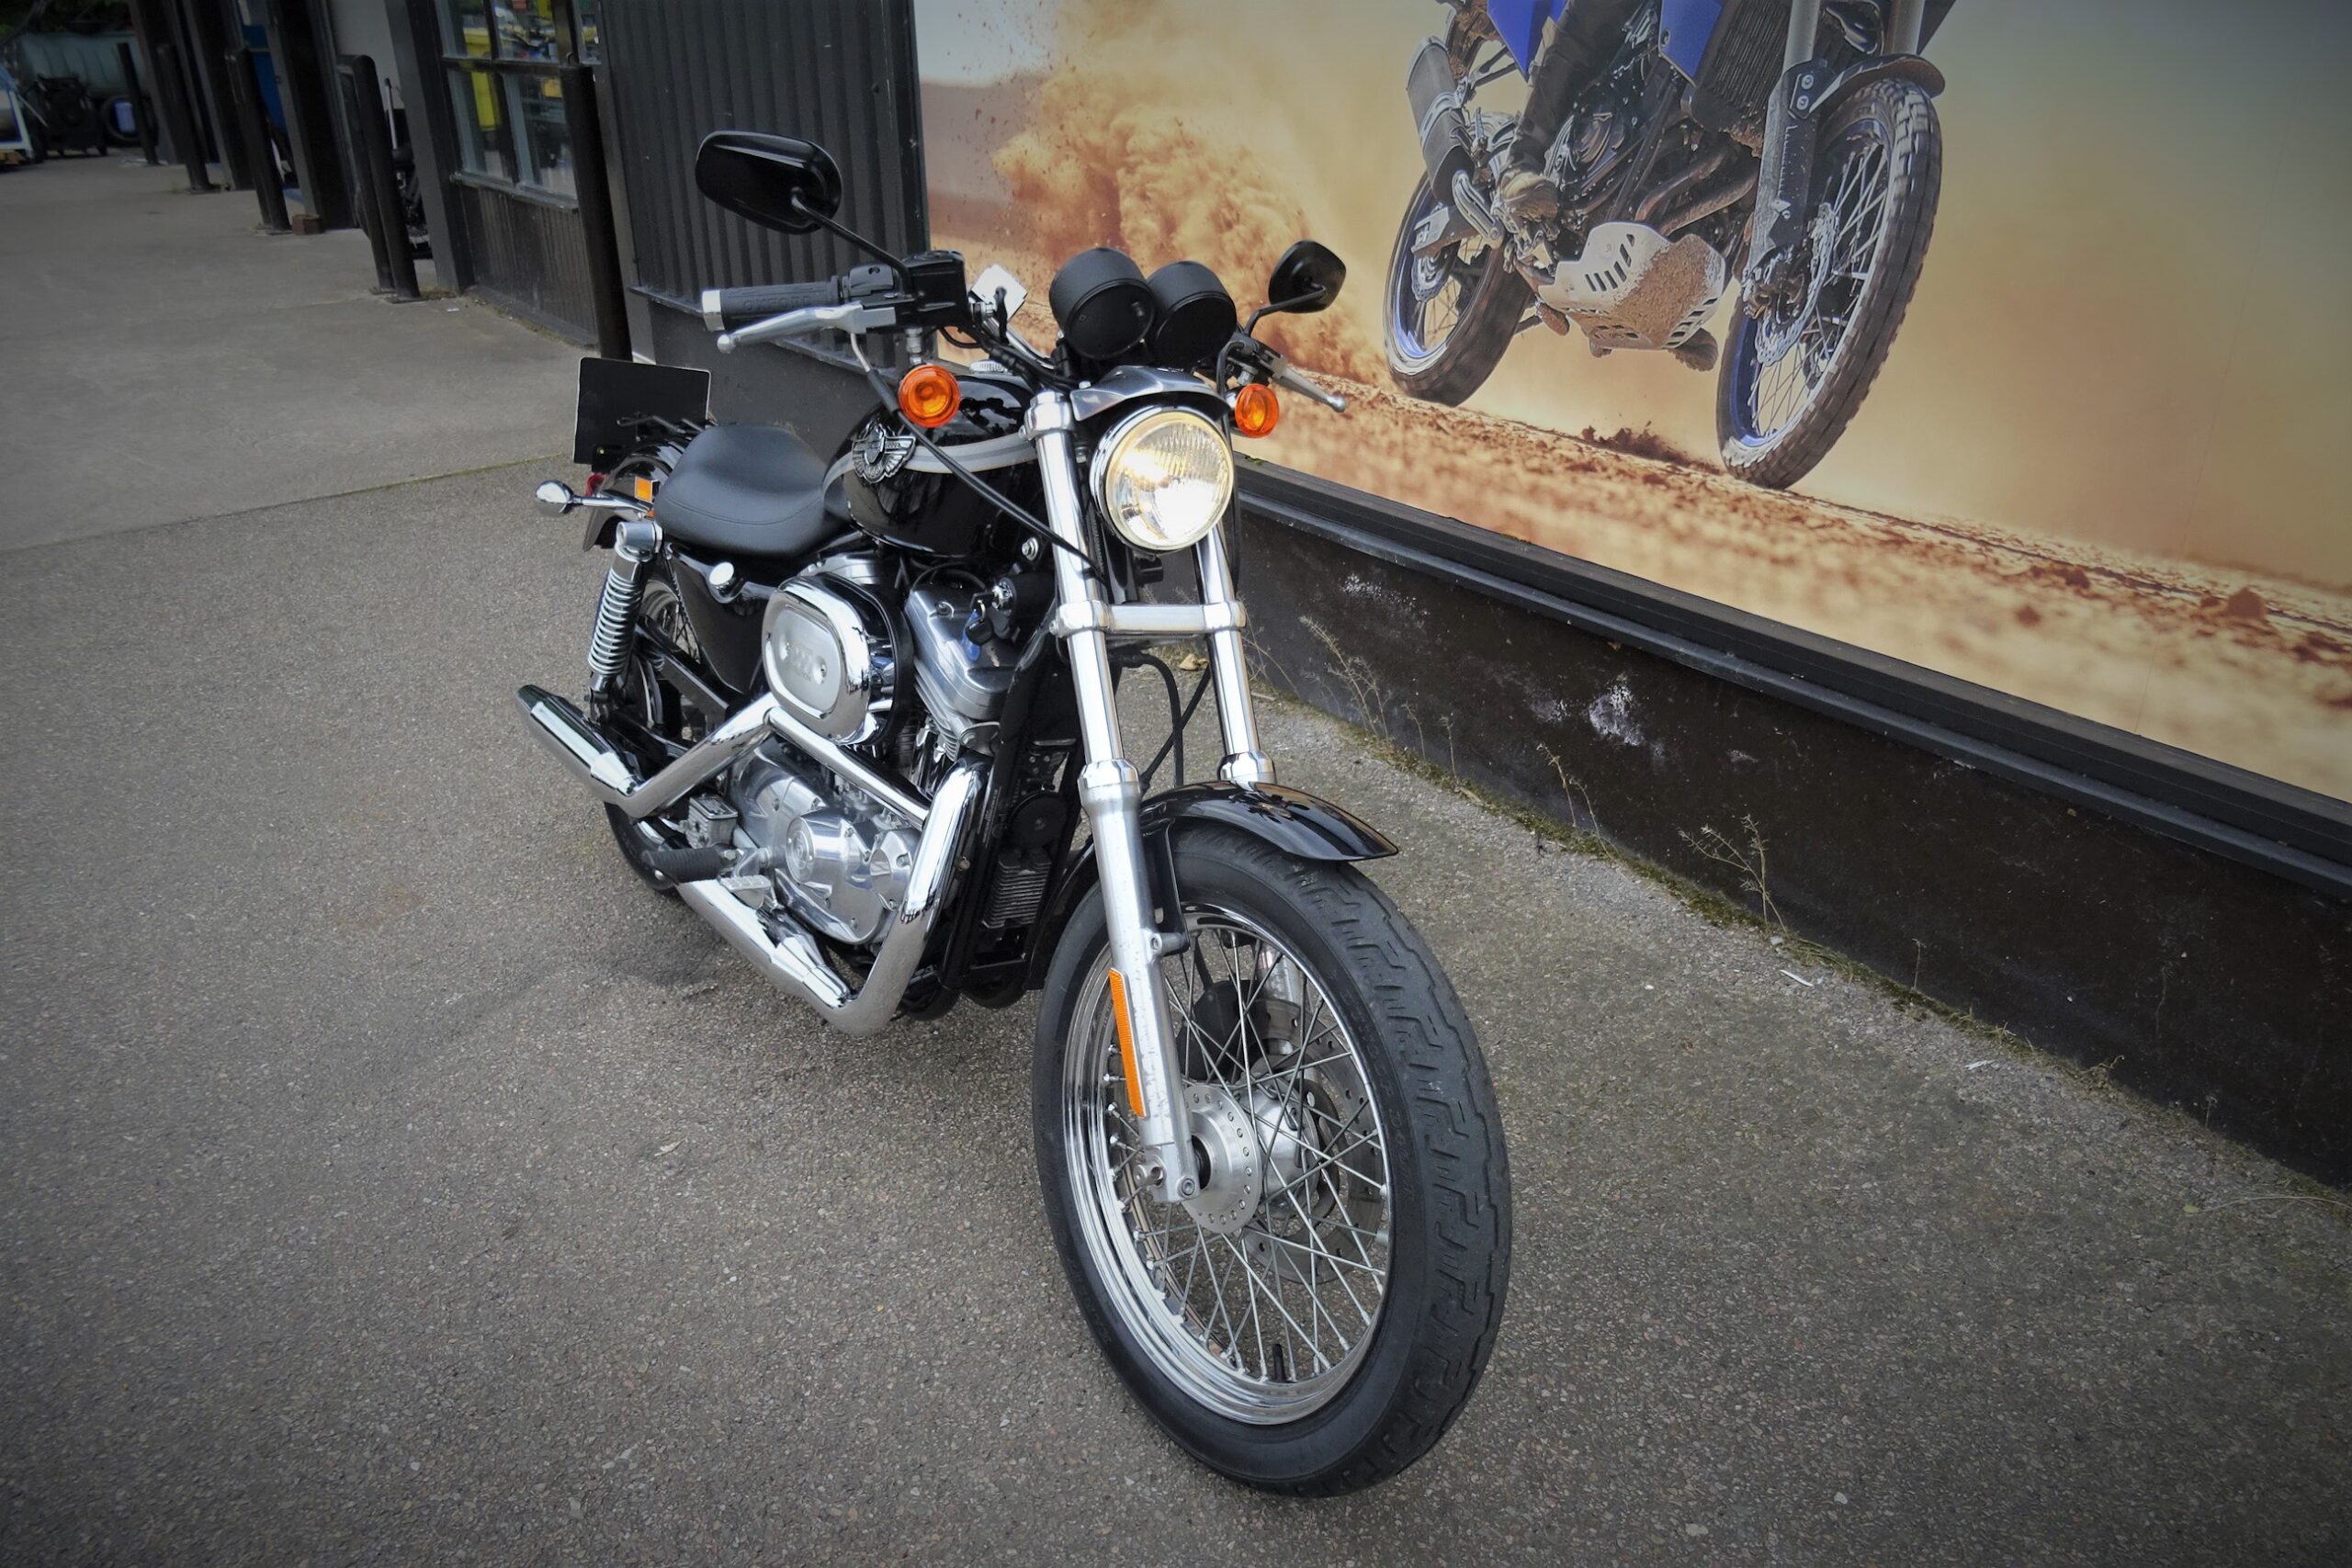 Harley Davidson Sportster 883 converted to 1200 100th Anniversary